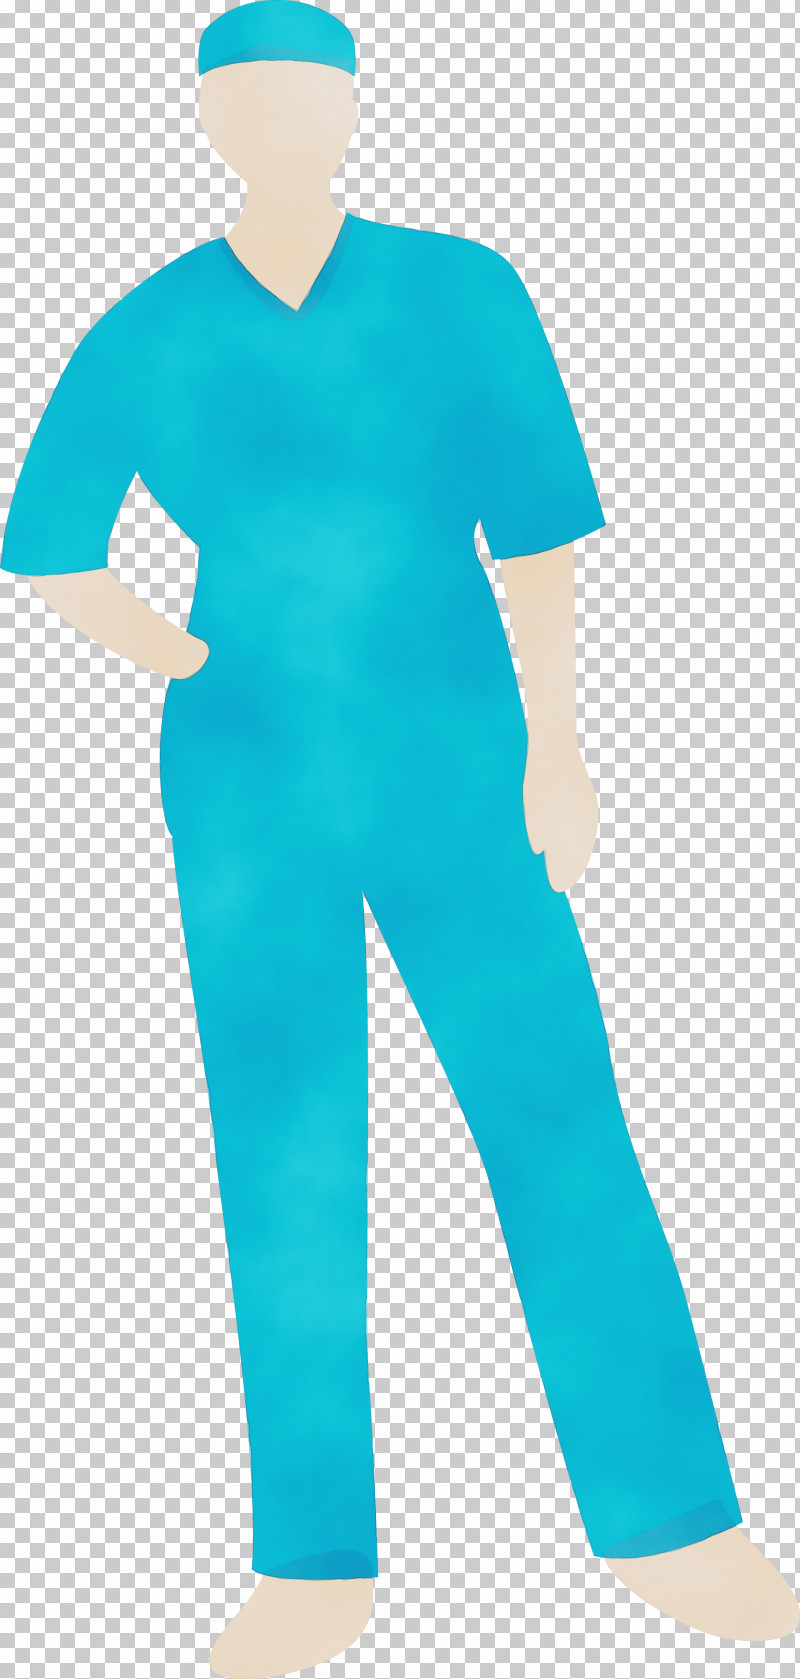 Sleeve Medical Glove Uniform Glove Turquoise PNG, Clipart, Glove, Medical Elements, Medical Glove, Paint, Sleeve Free PNG Download